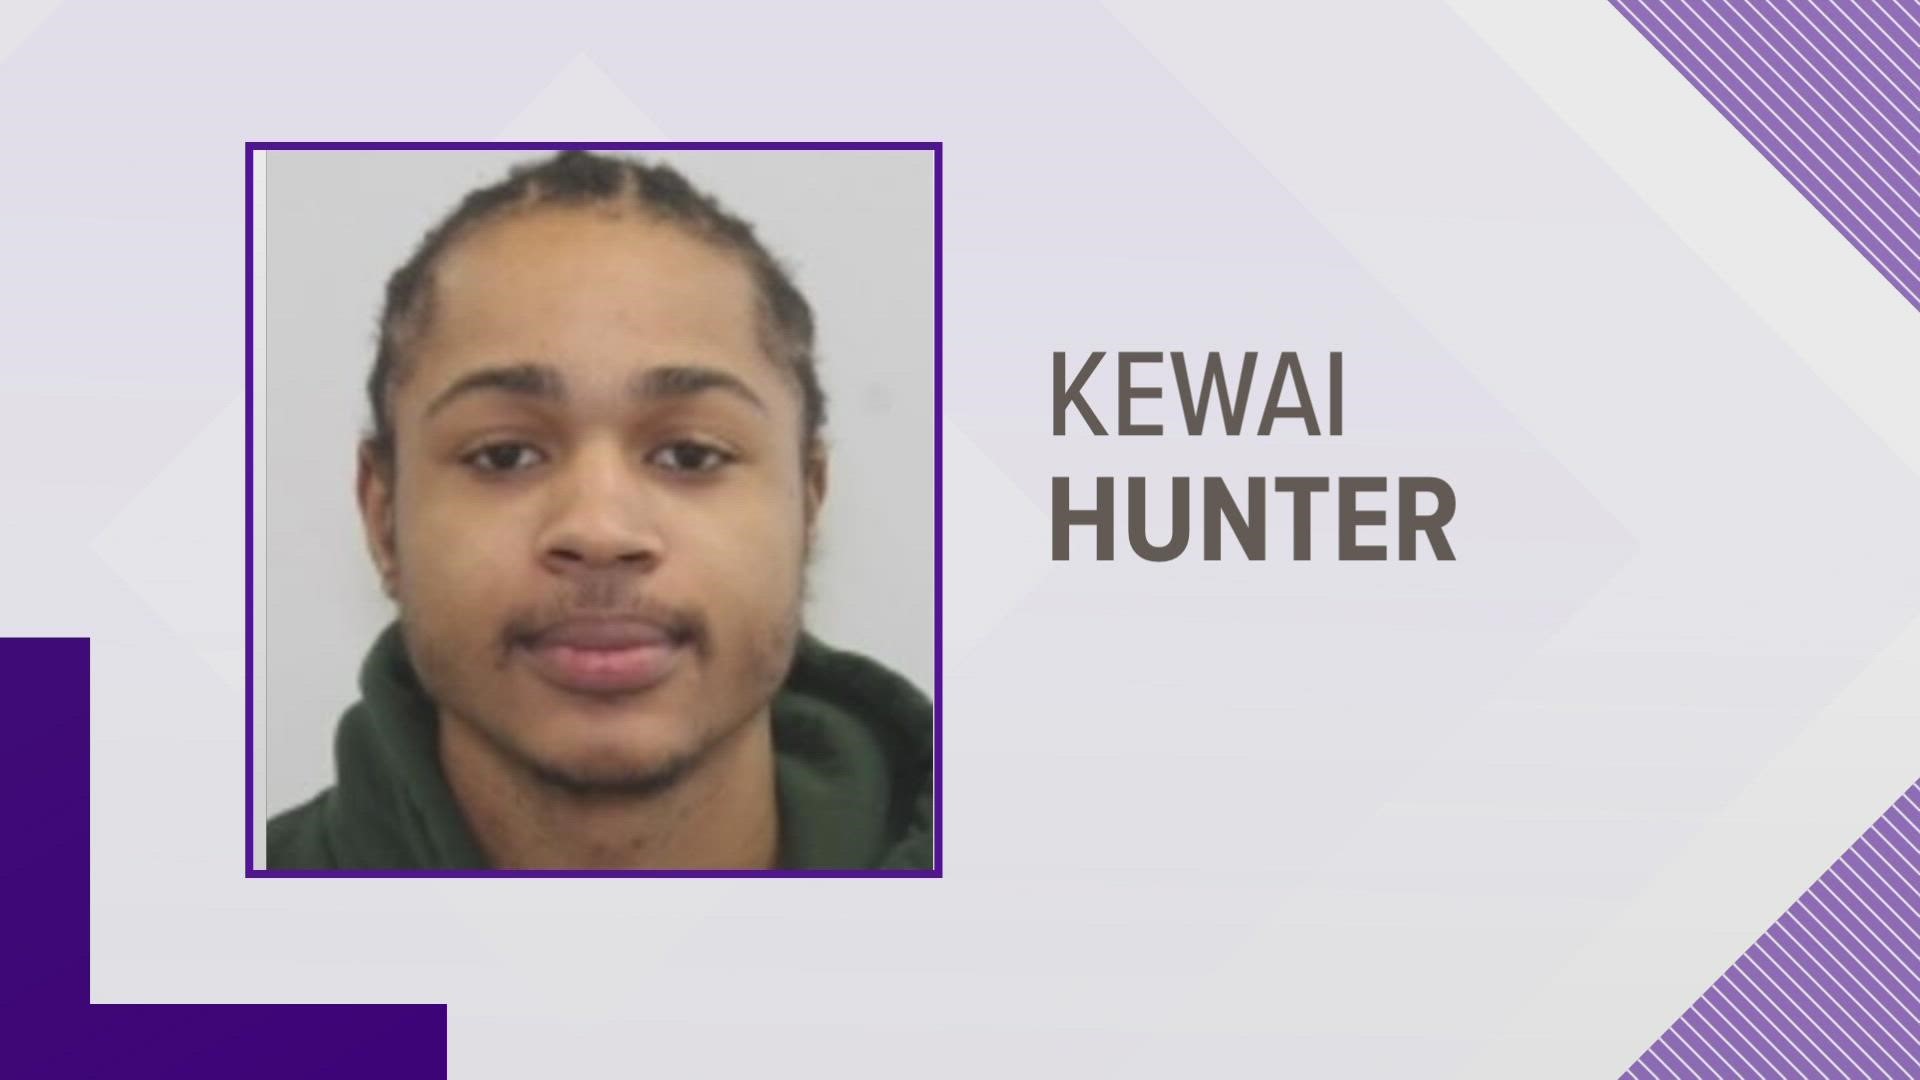 A warrant has been issued for Kewai Hunter for the murder of Roderick Michael.